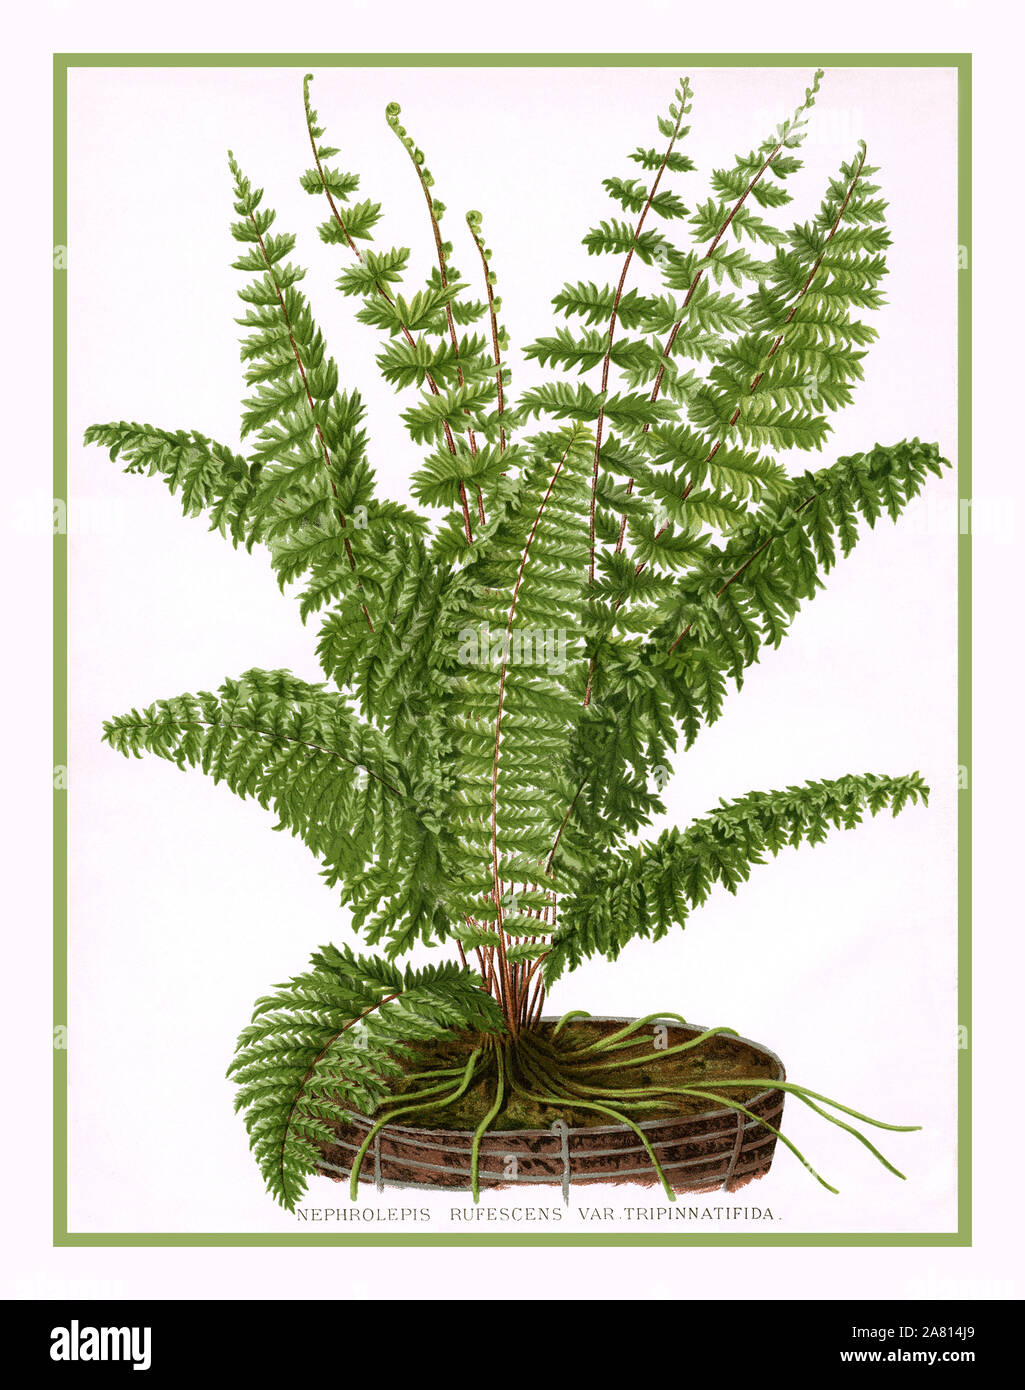 FERN LITHOGRAPH 1885 Vintage page illustration of a fern. The scientific name of the plant is: Nephrolepis Rufescens Var Tripinnatifida.  Illustration from the Dictionary of Gardening – A Practical and Scientific Encyclopedia of Horticulture, edited by George Nicholson, circa 1885. Stock Photo